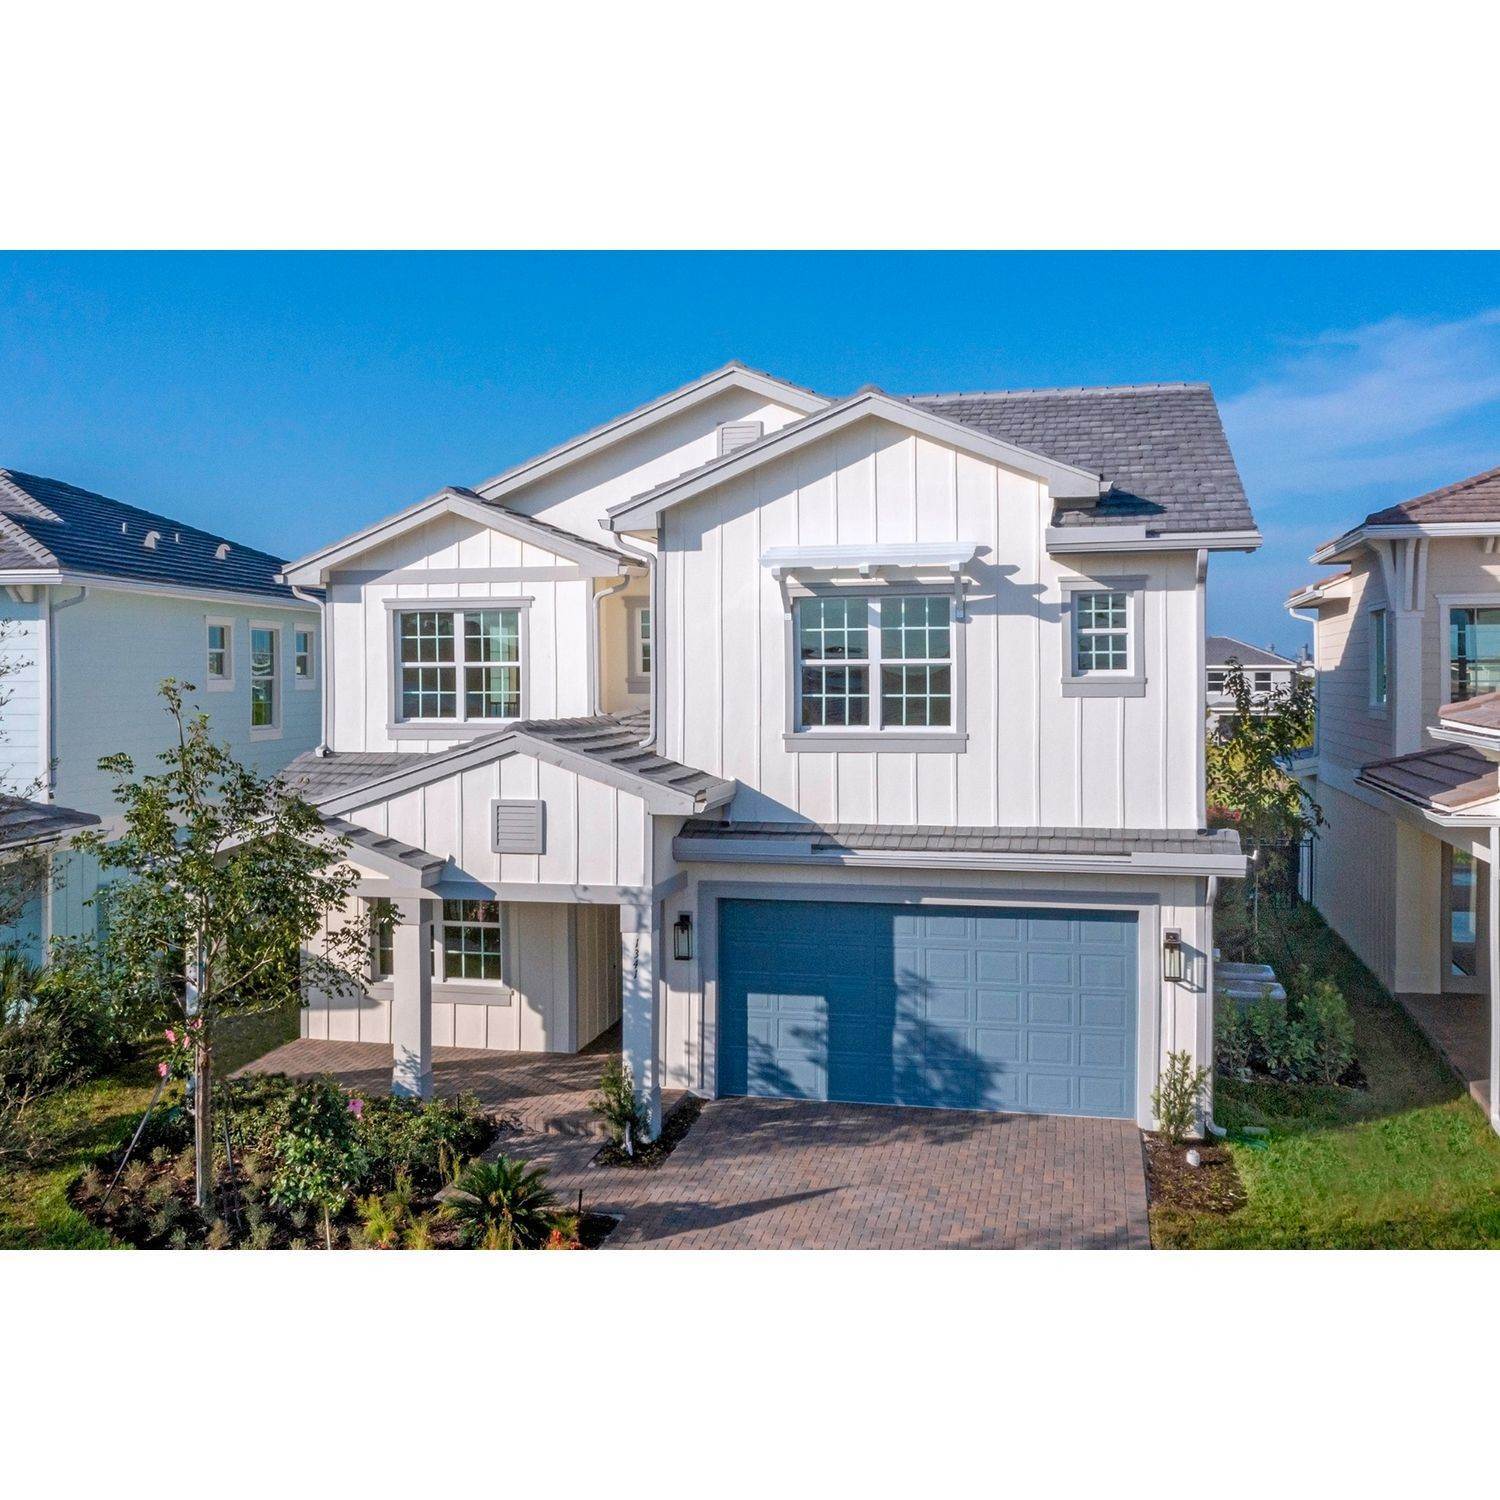 Single Family for Sale at Huntington 1341 Harvester Crossing LOXAHATCHEE, FLORIDA 33470 UNITED STATES